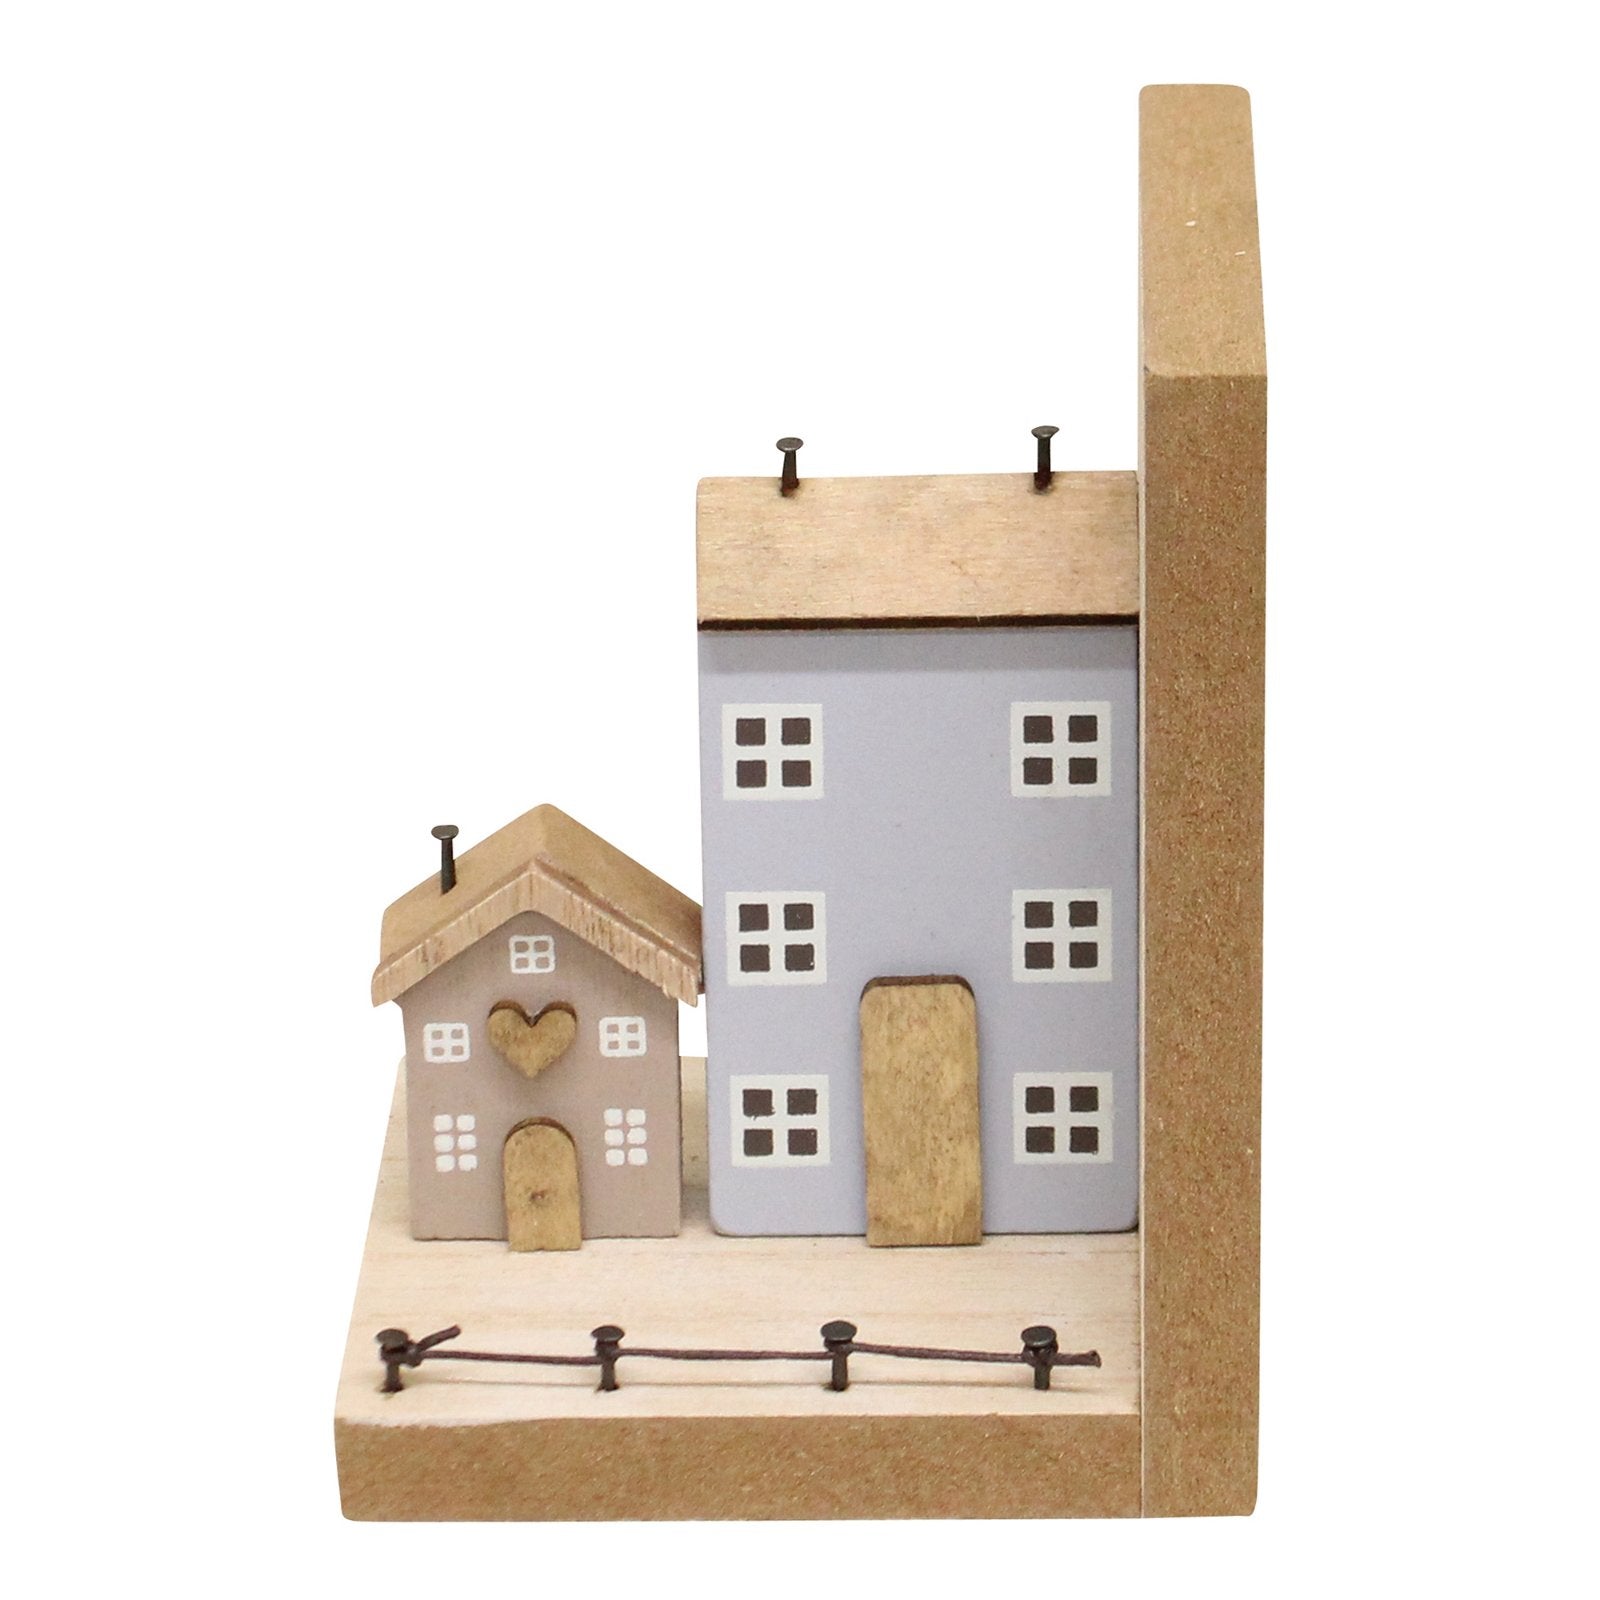 Pair of Bookends, Wooden Houses Design - Kaftan direct